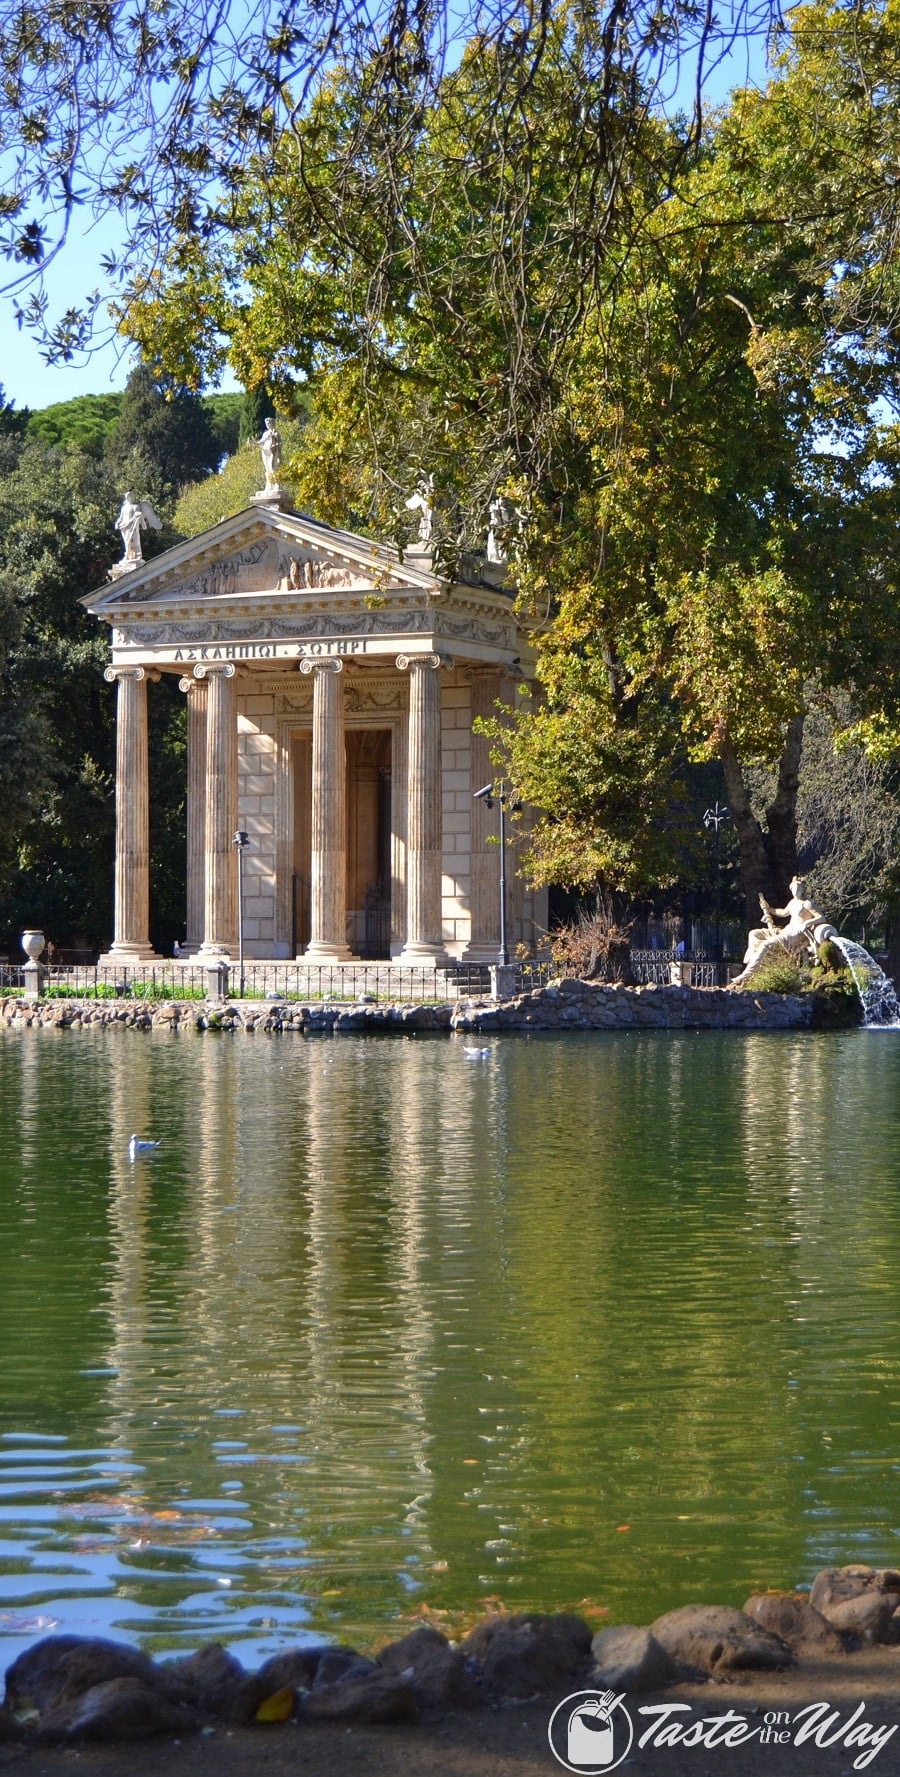 Visiting the Villa Borghese gardens is one of the top #thingstodo in #Rome, #Italy. Check out for more! #travel #photography